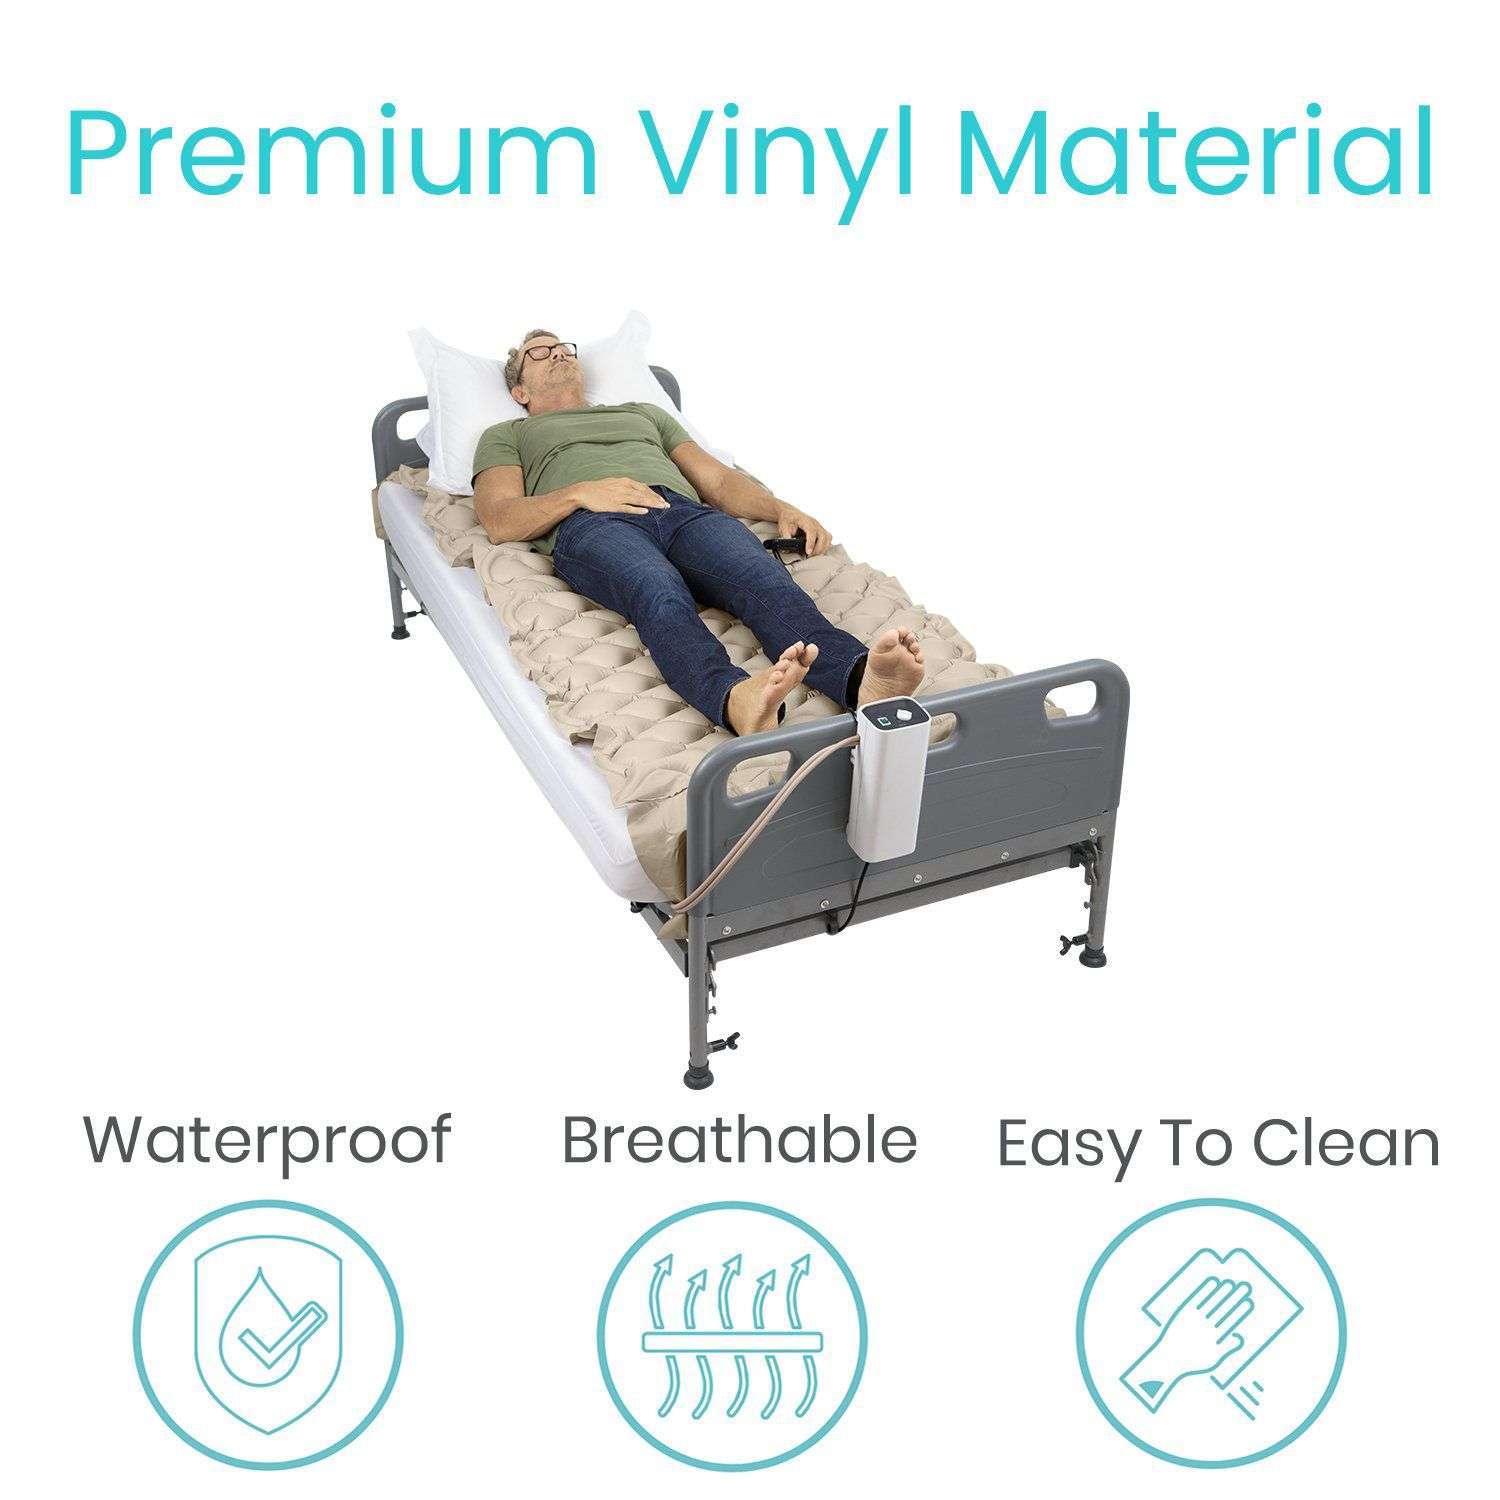 Vive Health Electric Bed Frame